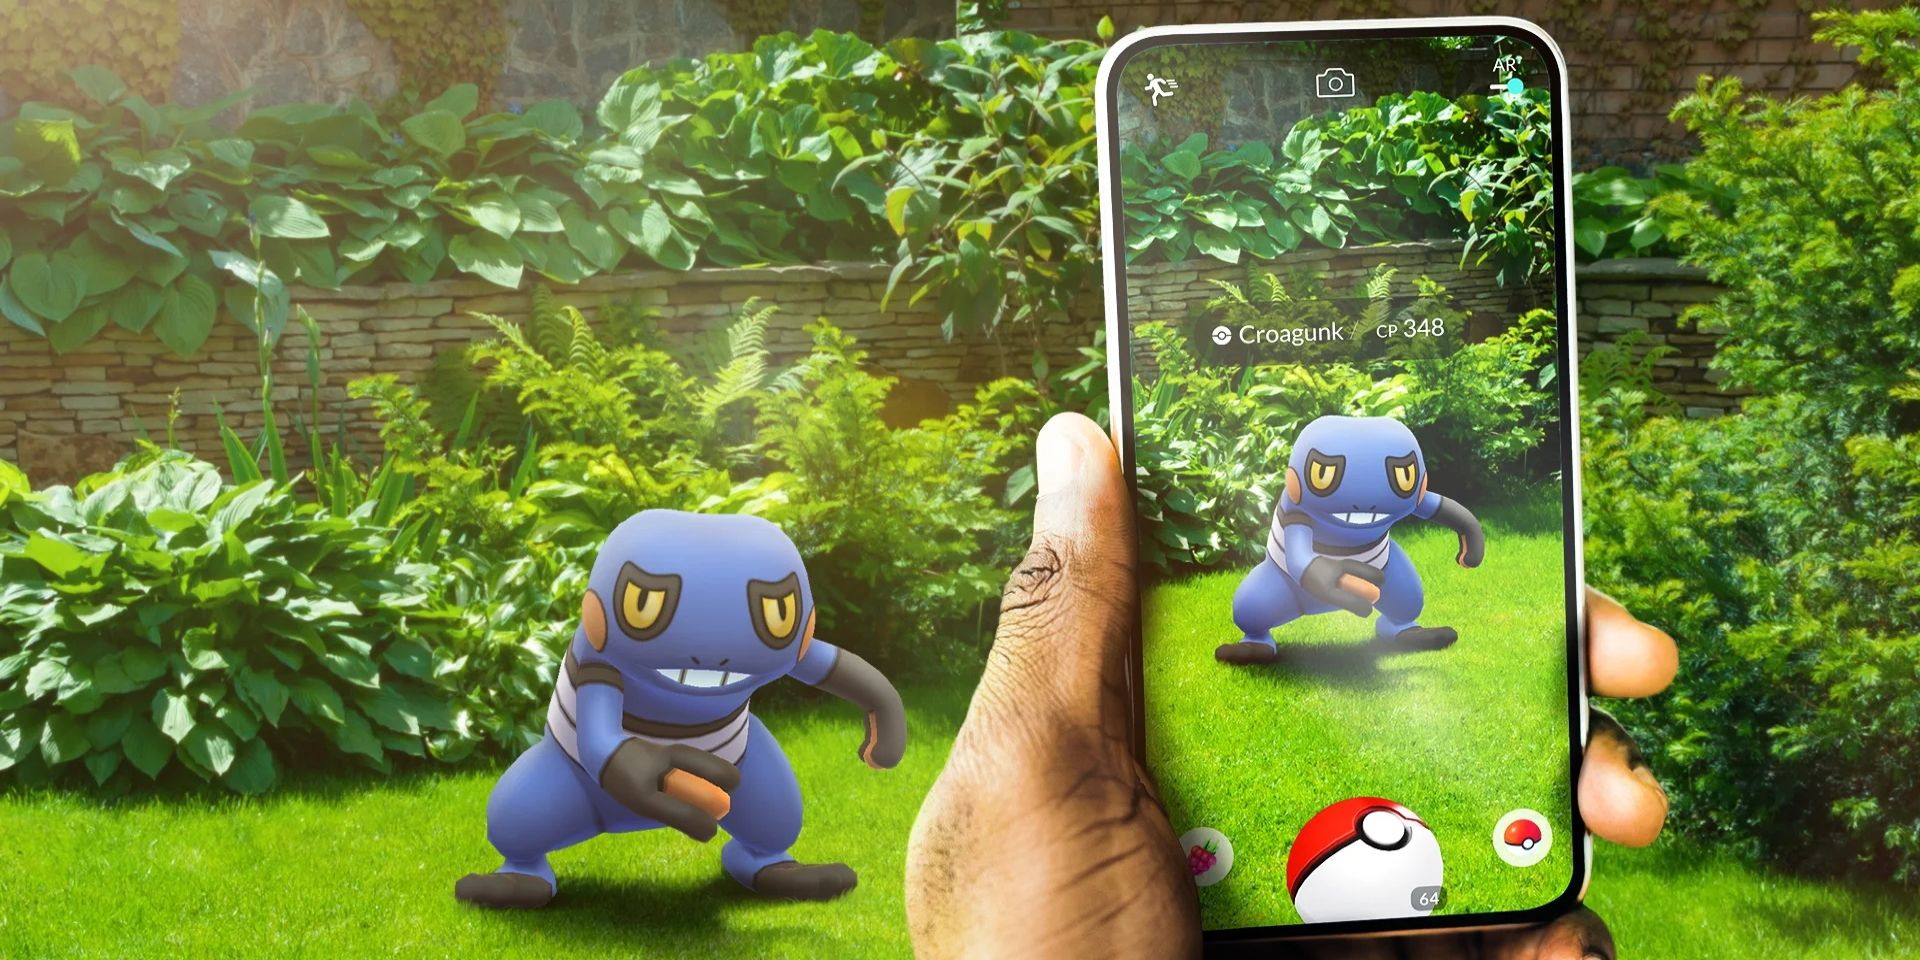 A hand holding a phone while playing Pokemon Go, pointing at a Croagunk standing in grass